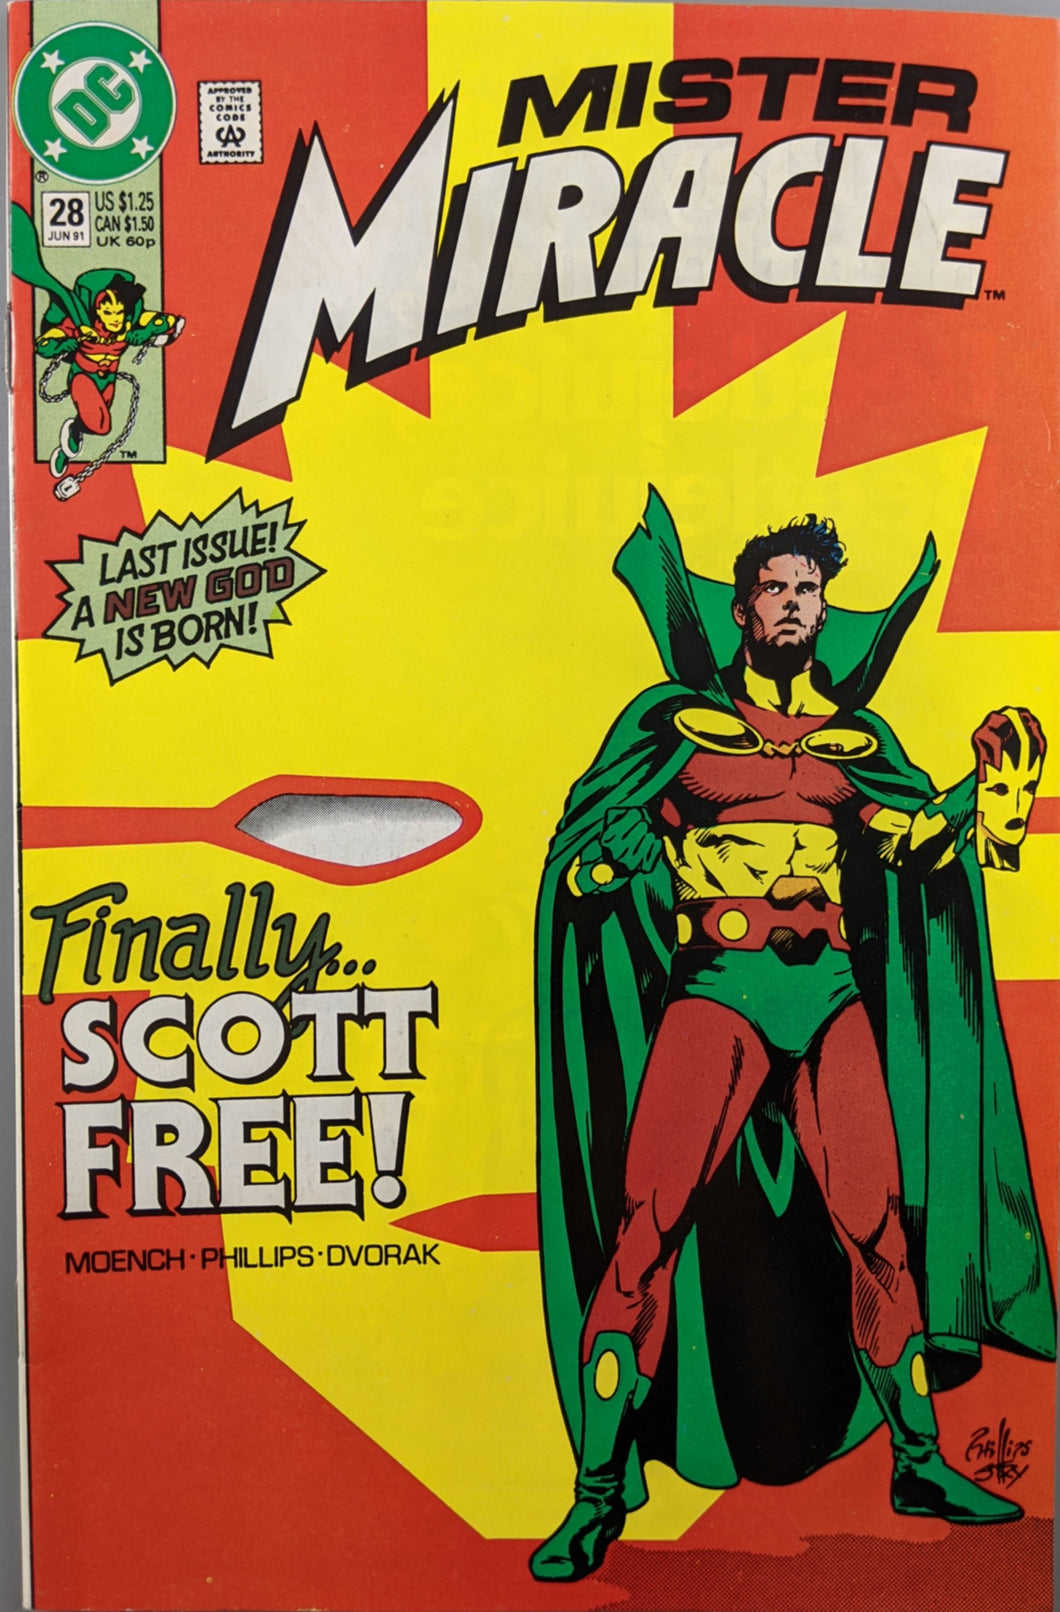 Mister Miracle (1989) #28